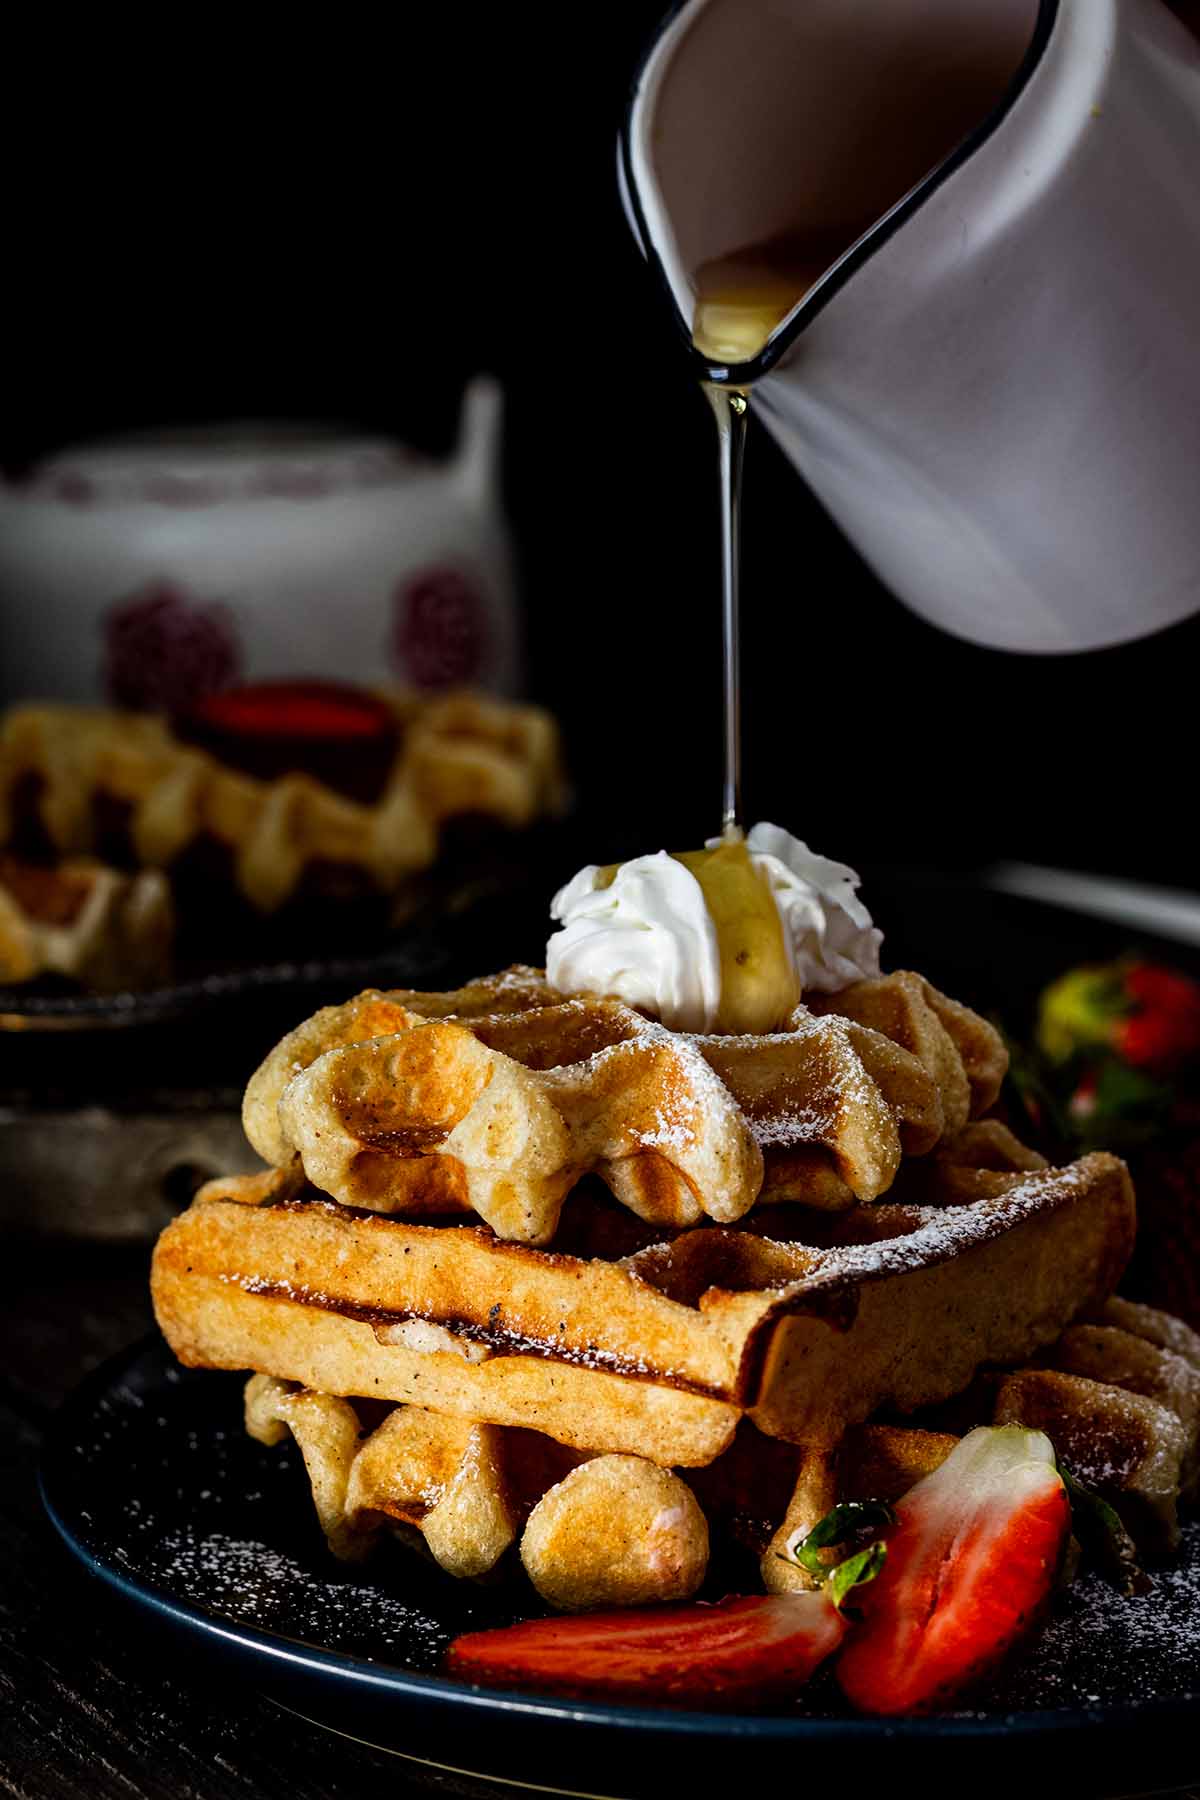 Syrup being poured onto a stack of buttermilk Belgian waffles